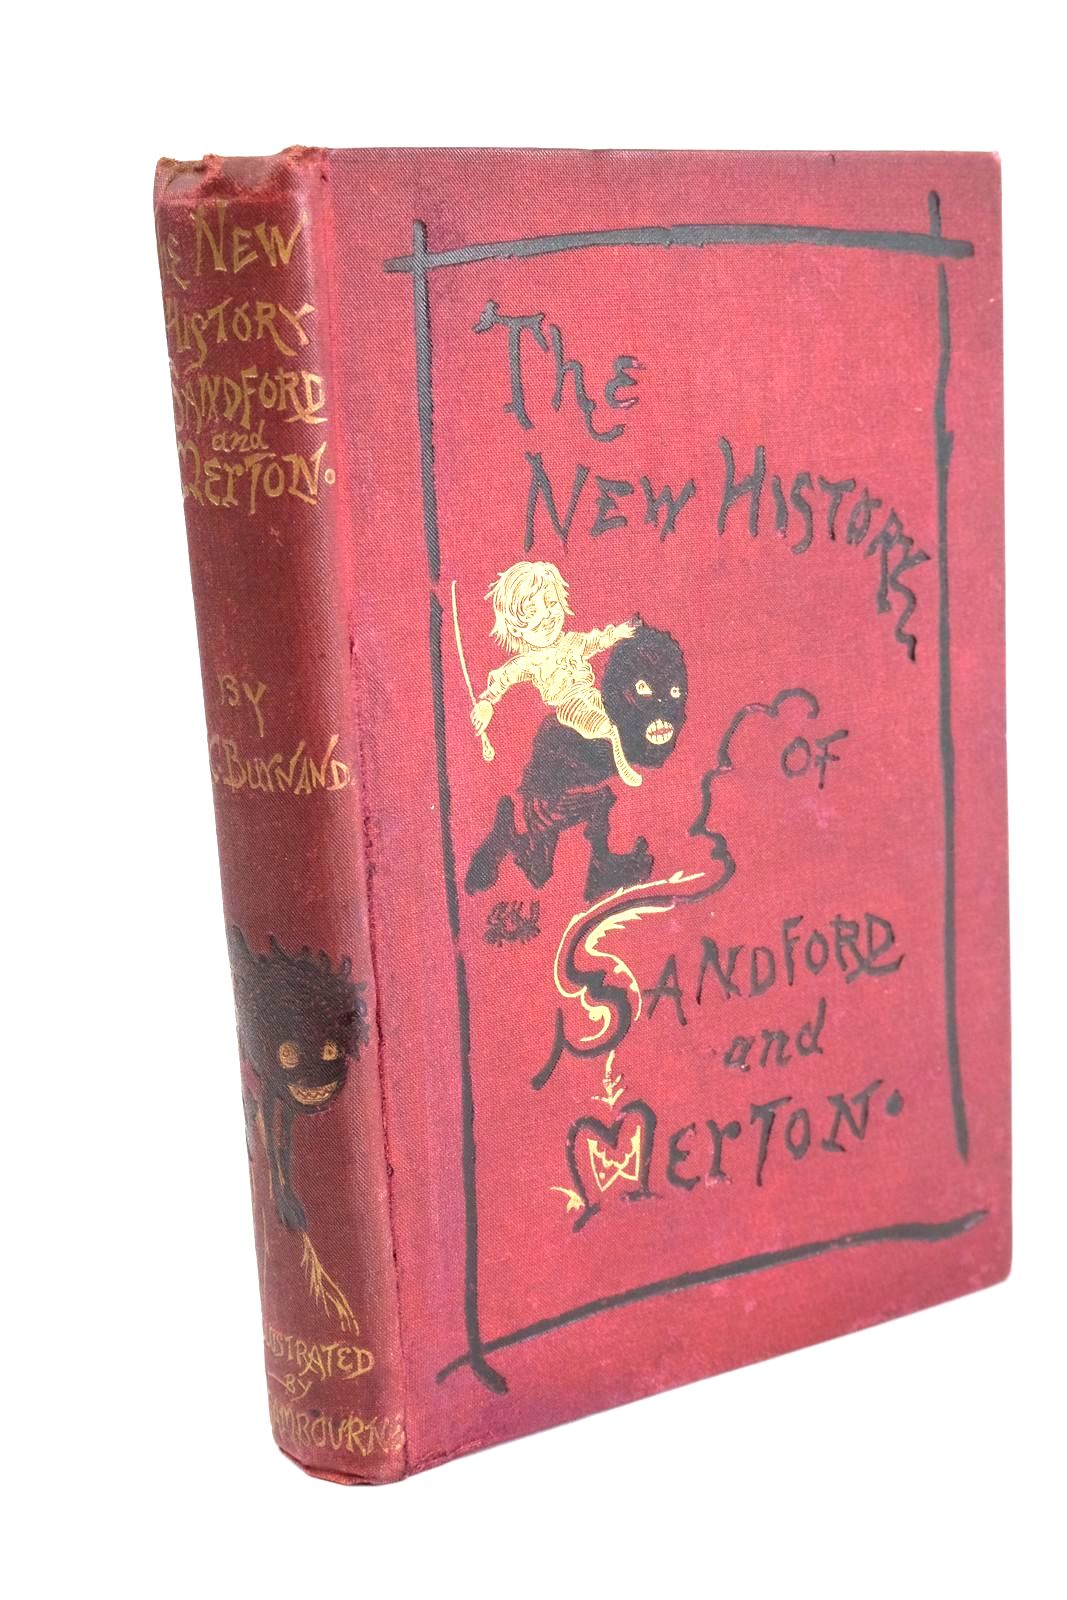 Photo of THE NEW HISTORY OF SANDFORD AND MERTON written by Burnand, F.C. illustrated by Sambourne, Linley published by Bradbury, Evans And Co., Bradbury (STOCK CODE: 1325019)  for sale by Stella & Rose's Books